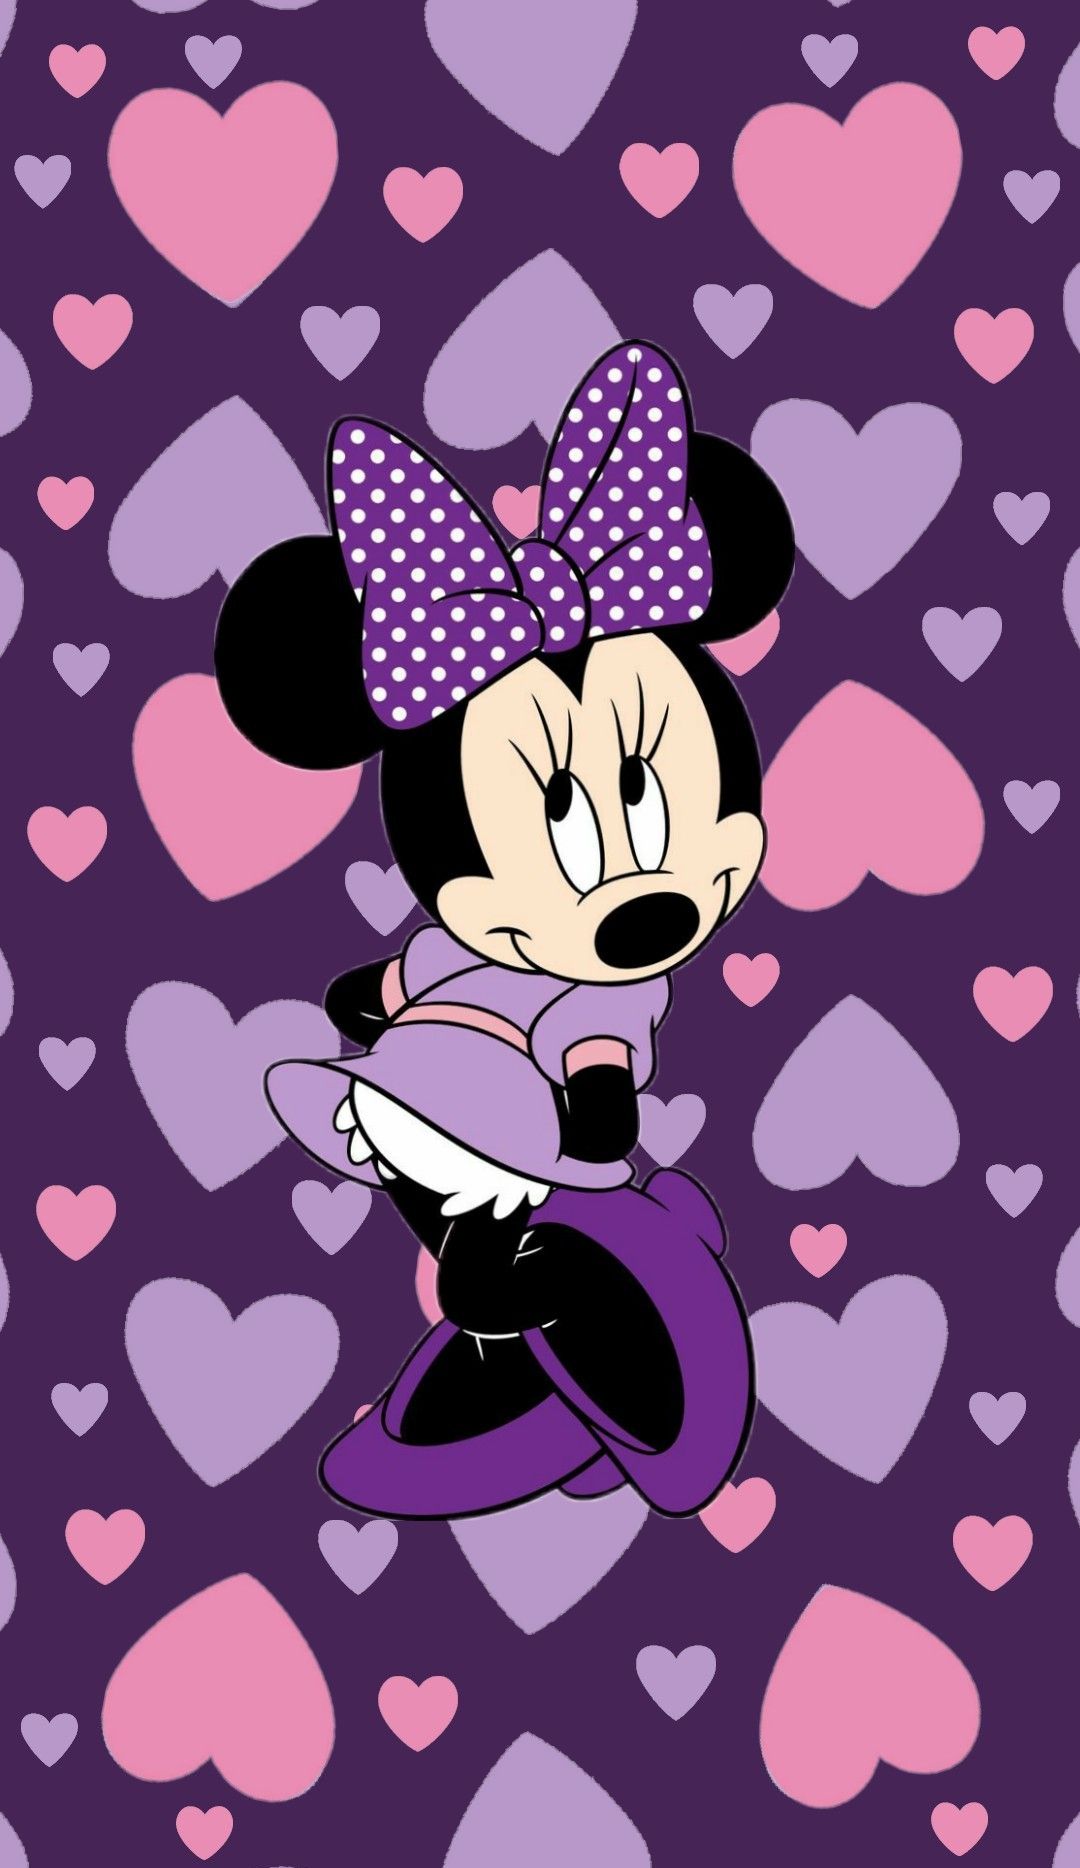 Minnie Iphone Wallpaper - KoLPaPer - Awesome Free HD Wallpapers